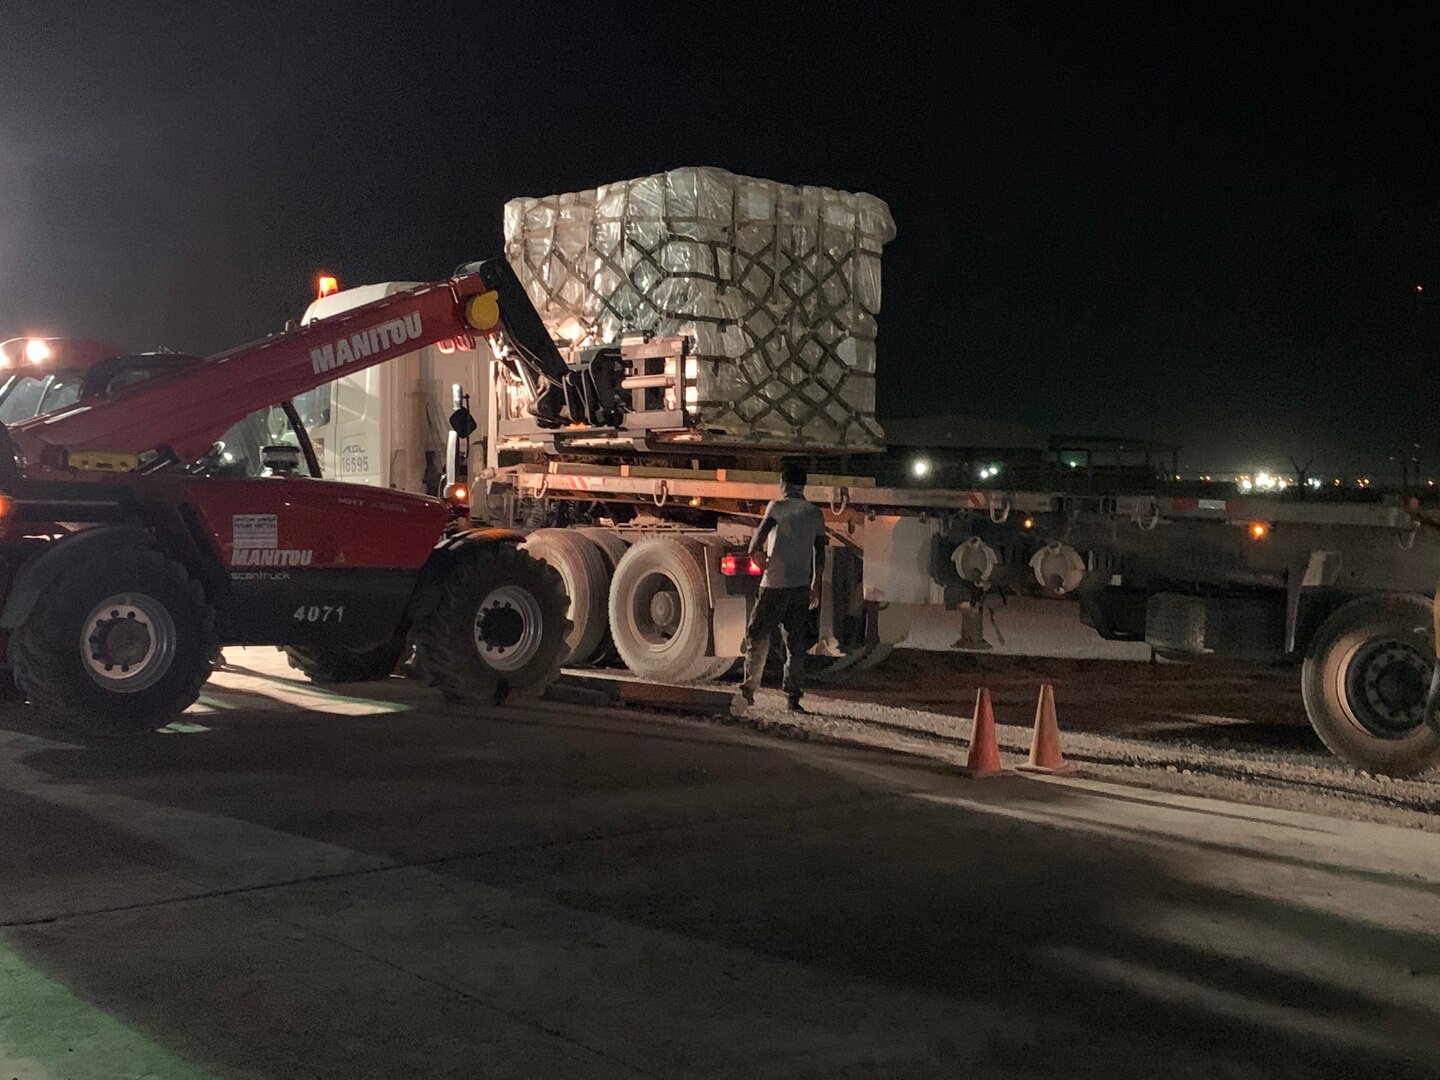 Personnel from the 1st Theater Sustainment Command executed night operations at Camp Arifjan, Kuwait, Aug. 5, 2020, in response to the Lebanon tragedy. 1st TSC Soldiers and contractors immediately responded to the crisis in Lebanon by packing supplies for transportation to a nearby flight line.